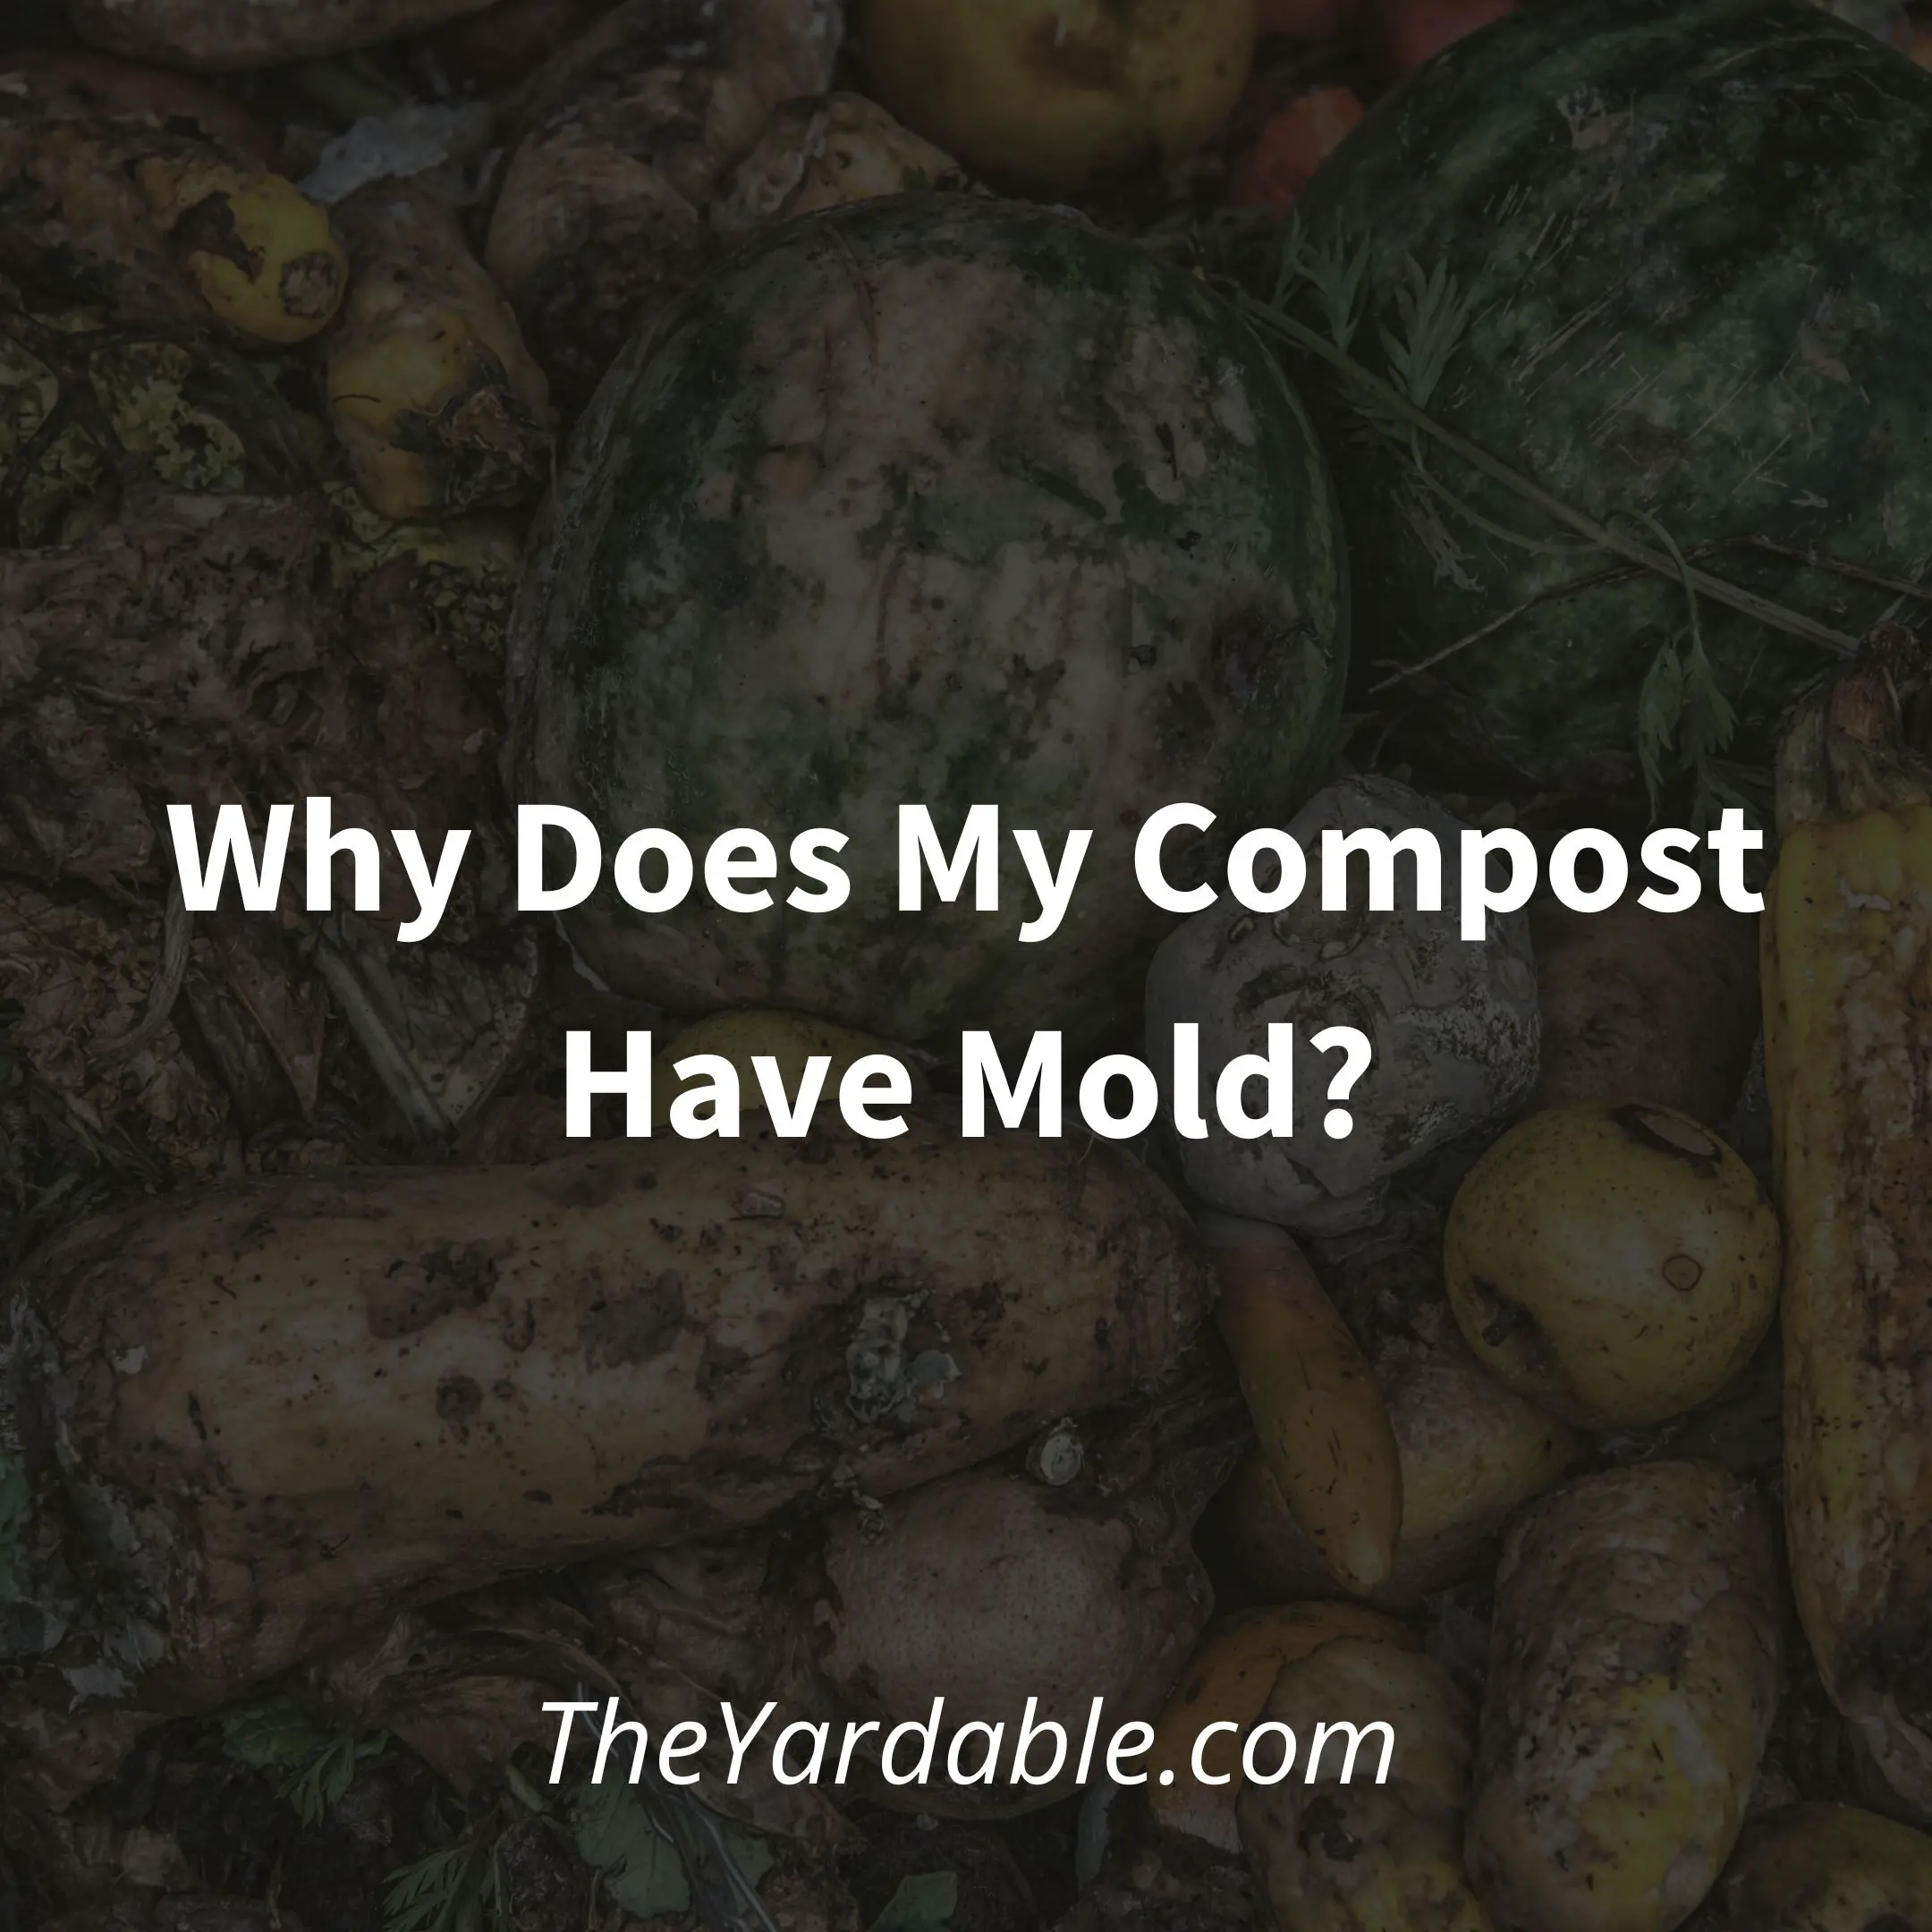 Why Does My Compost Have Mold?